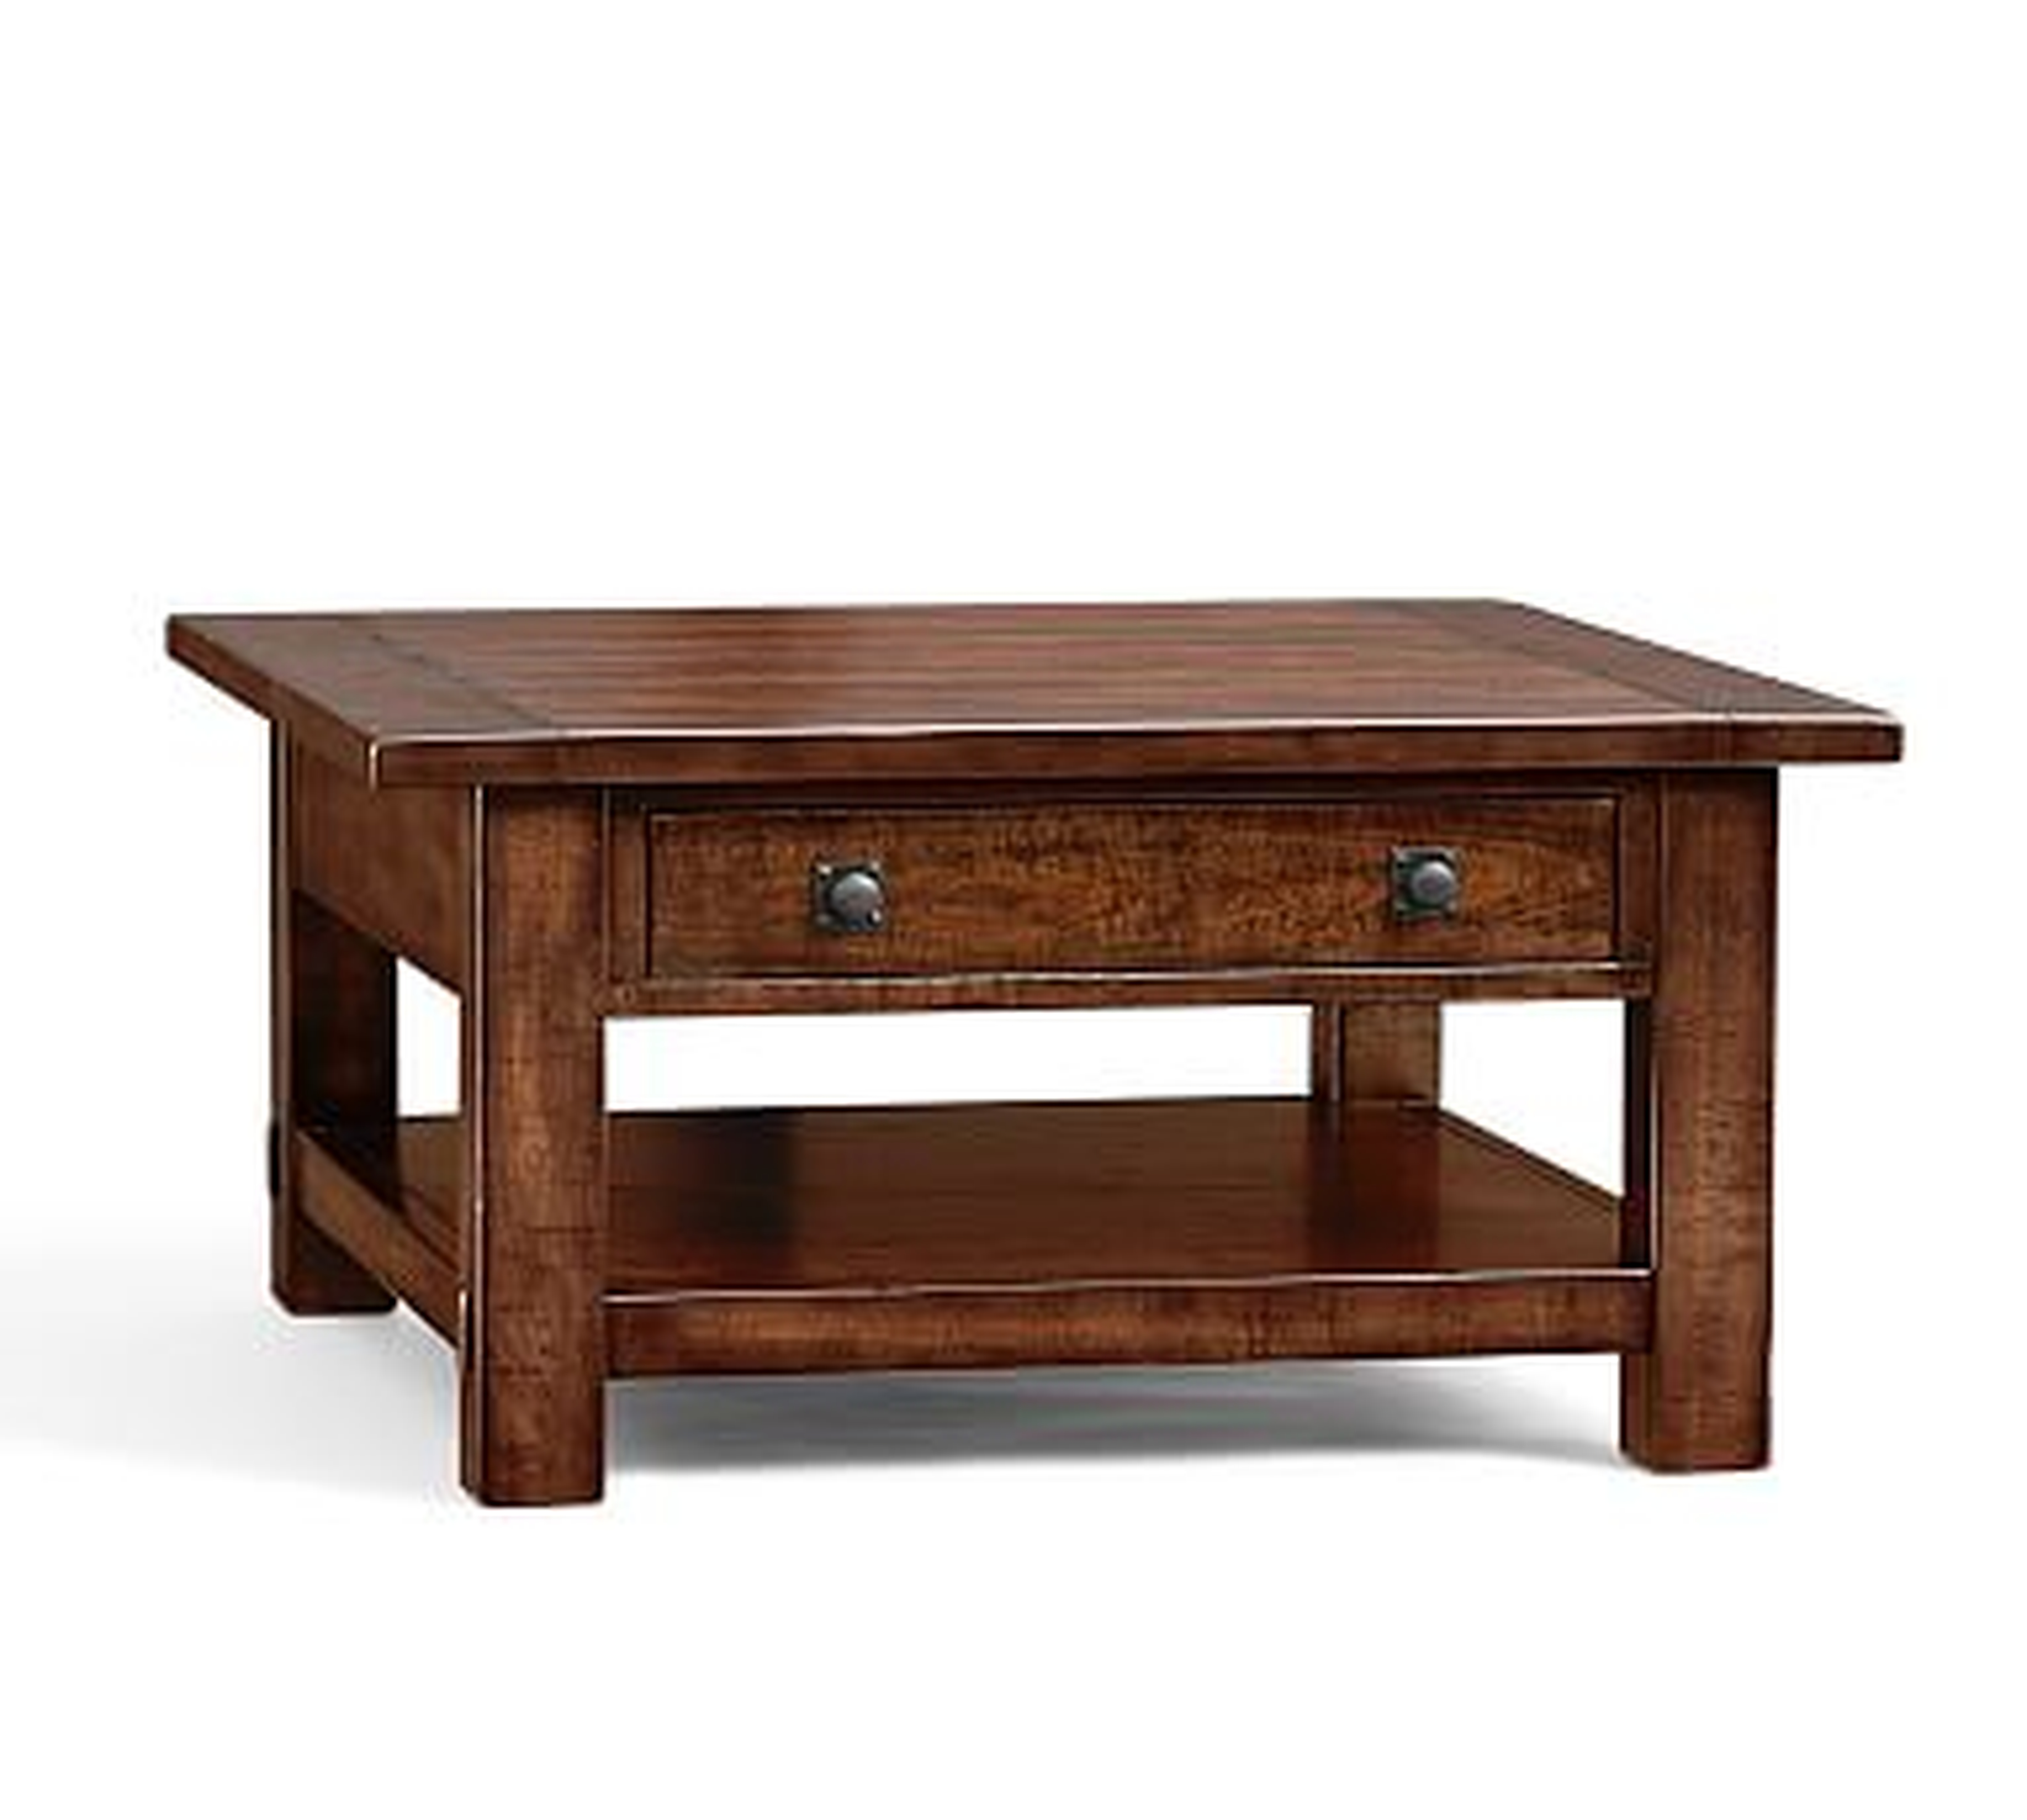 Benchwright Square Wood Coffee Table with Drawer, Rustic Mahogany, 36"L - Pottery Barn